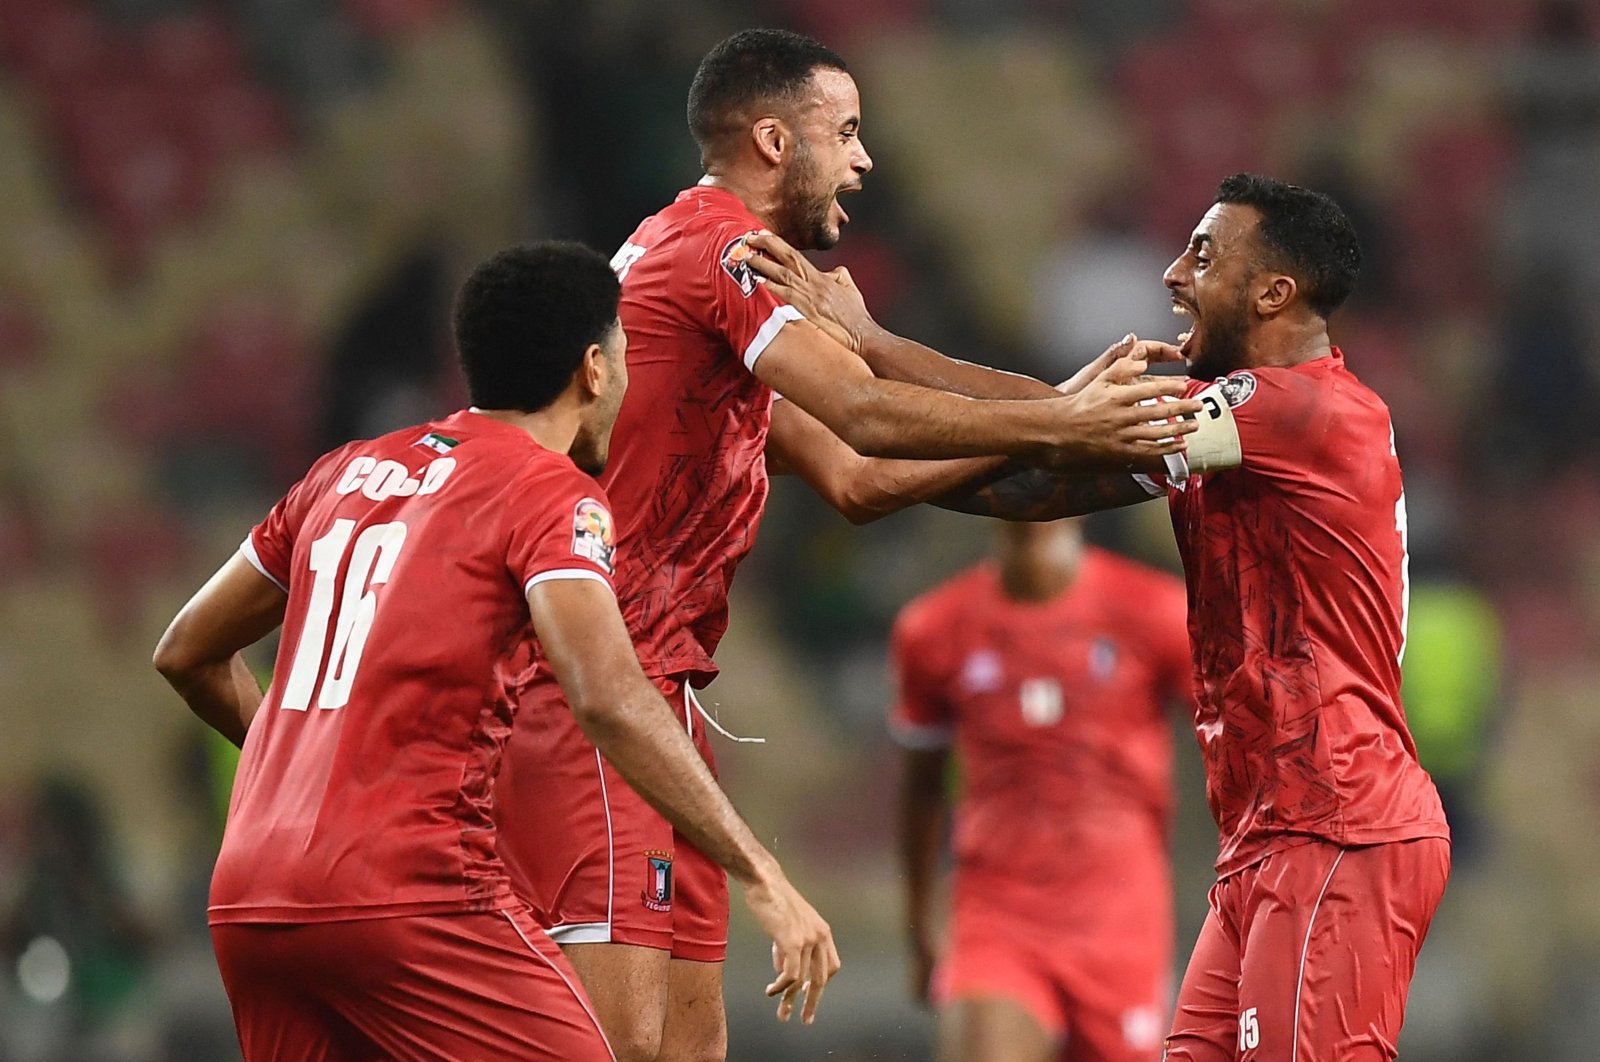 Equatorial Guinea&#039;s Carlos Akapo (R) celebrates with teammates after winning an Africa Cup of Nations match against Algeria, Douala, Cameroon, Jan. 16, 2022. (AFP Photo)